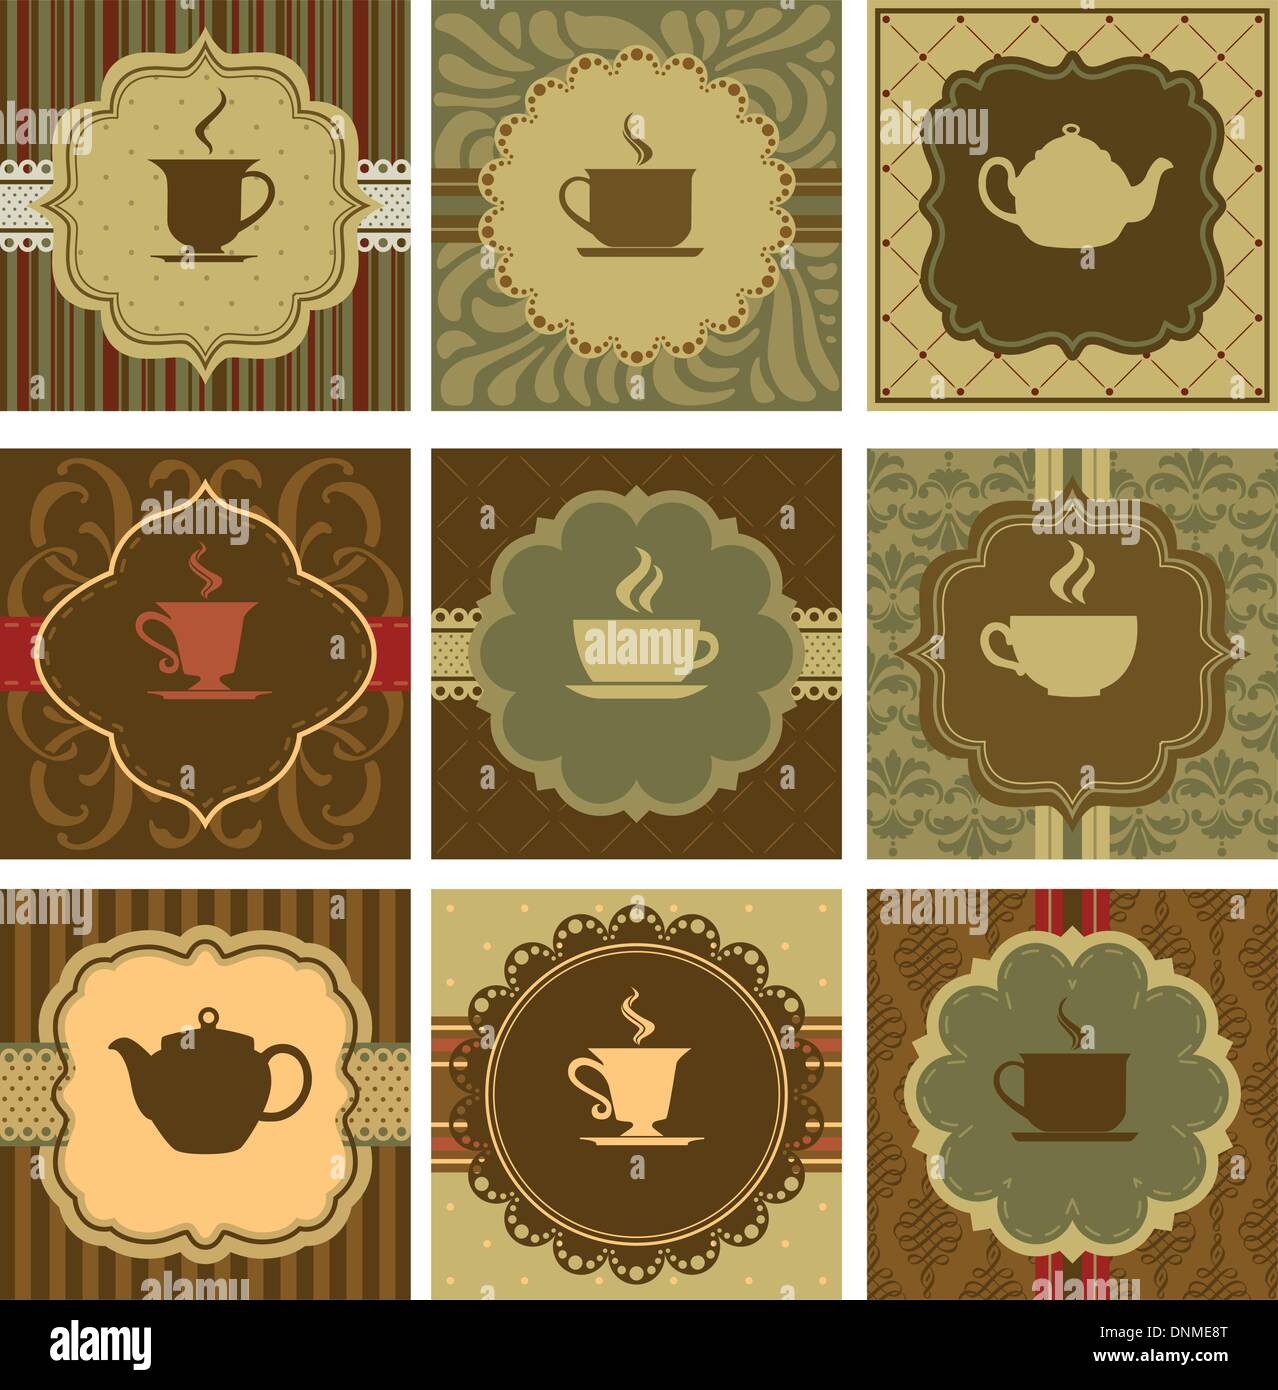 A vector illustration of different coffee designs Stock Vector